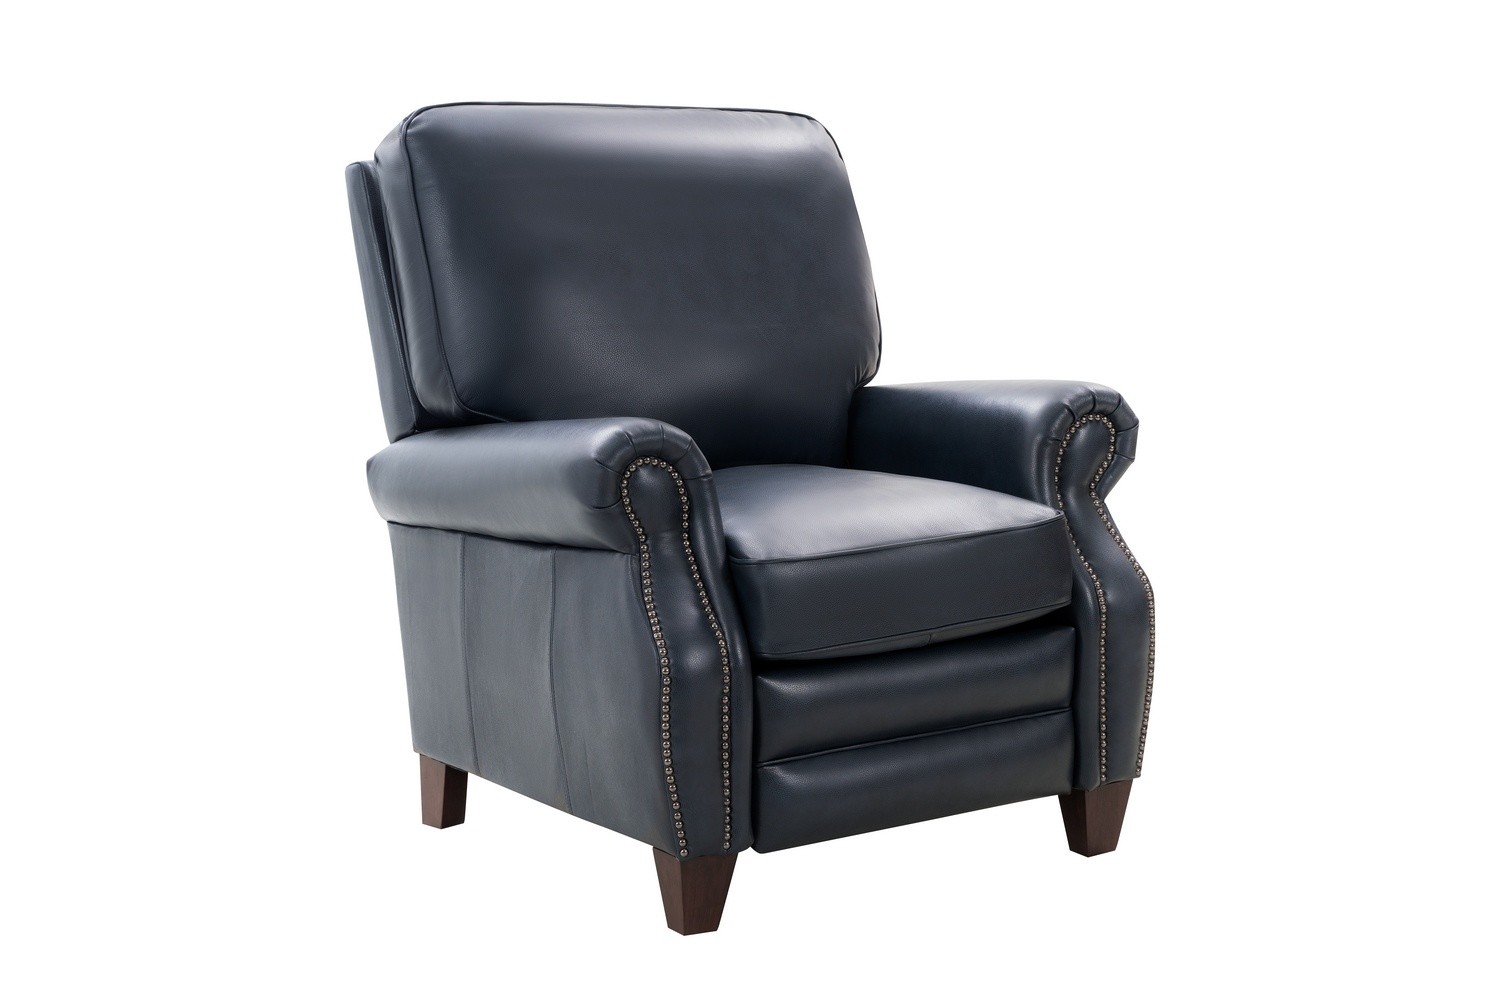 Barcalounger Briarwood Recliner Chair - Barone Navy Blue/All Leather